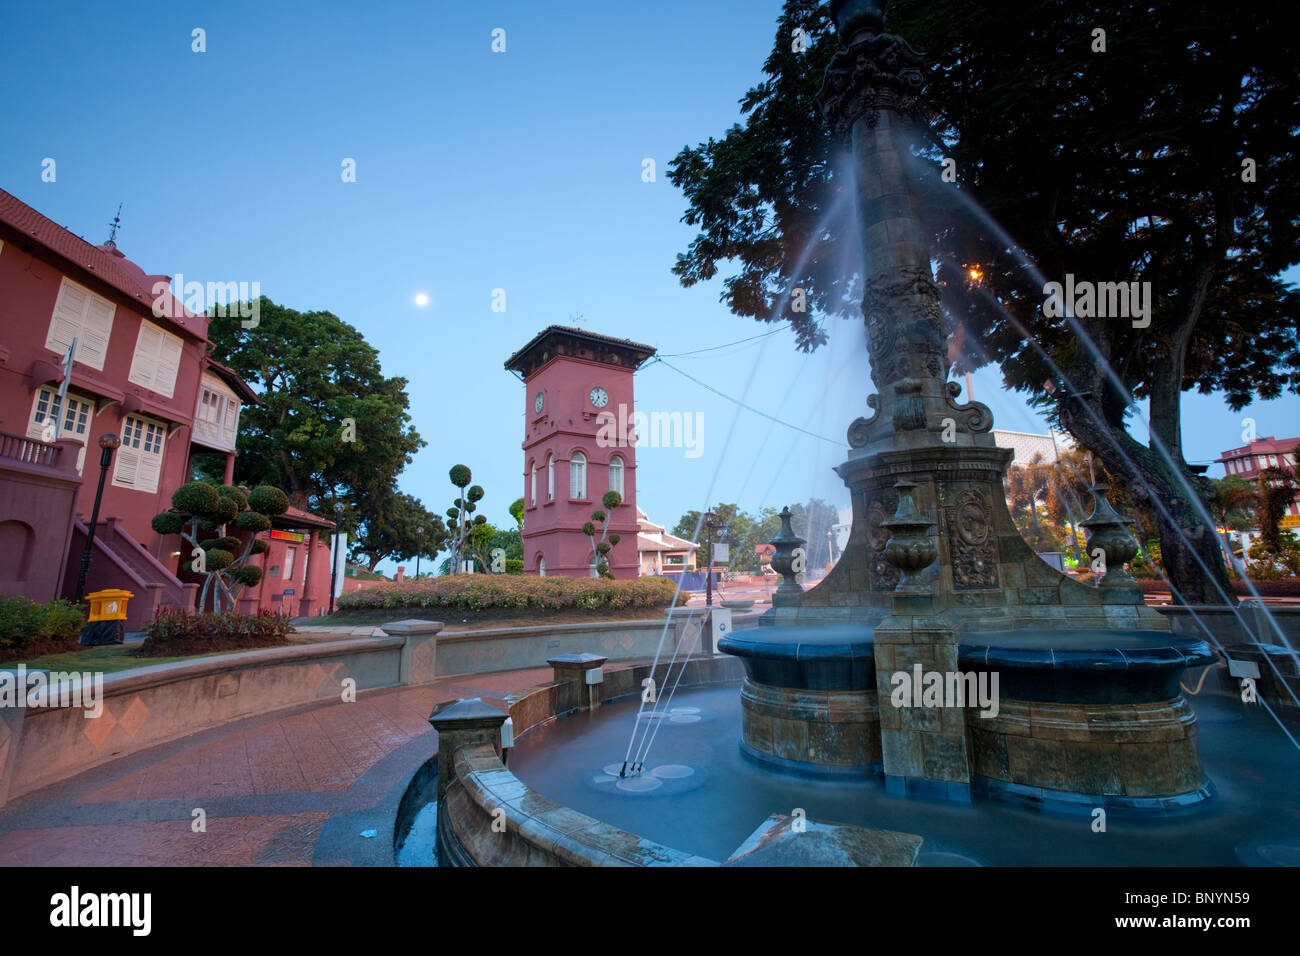 Fountain on the Dutch Square in Malacca Town, Malaysia. Stock Photo